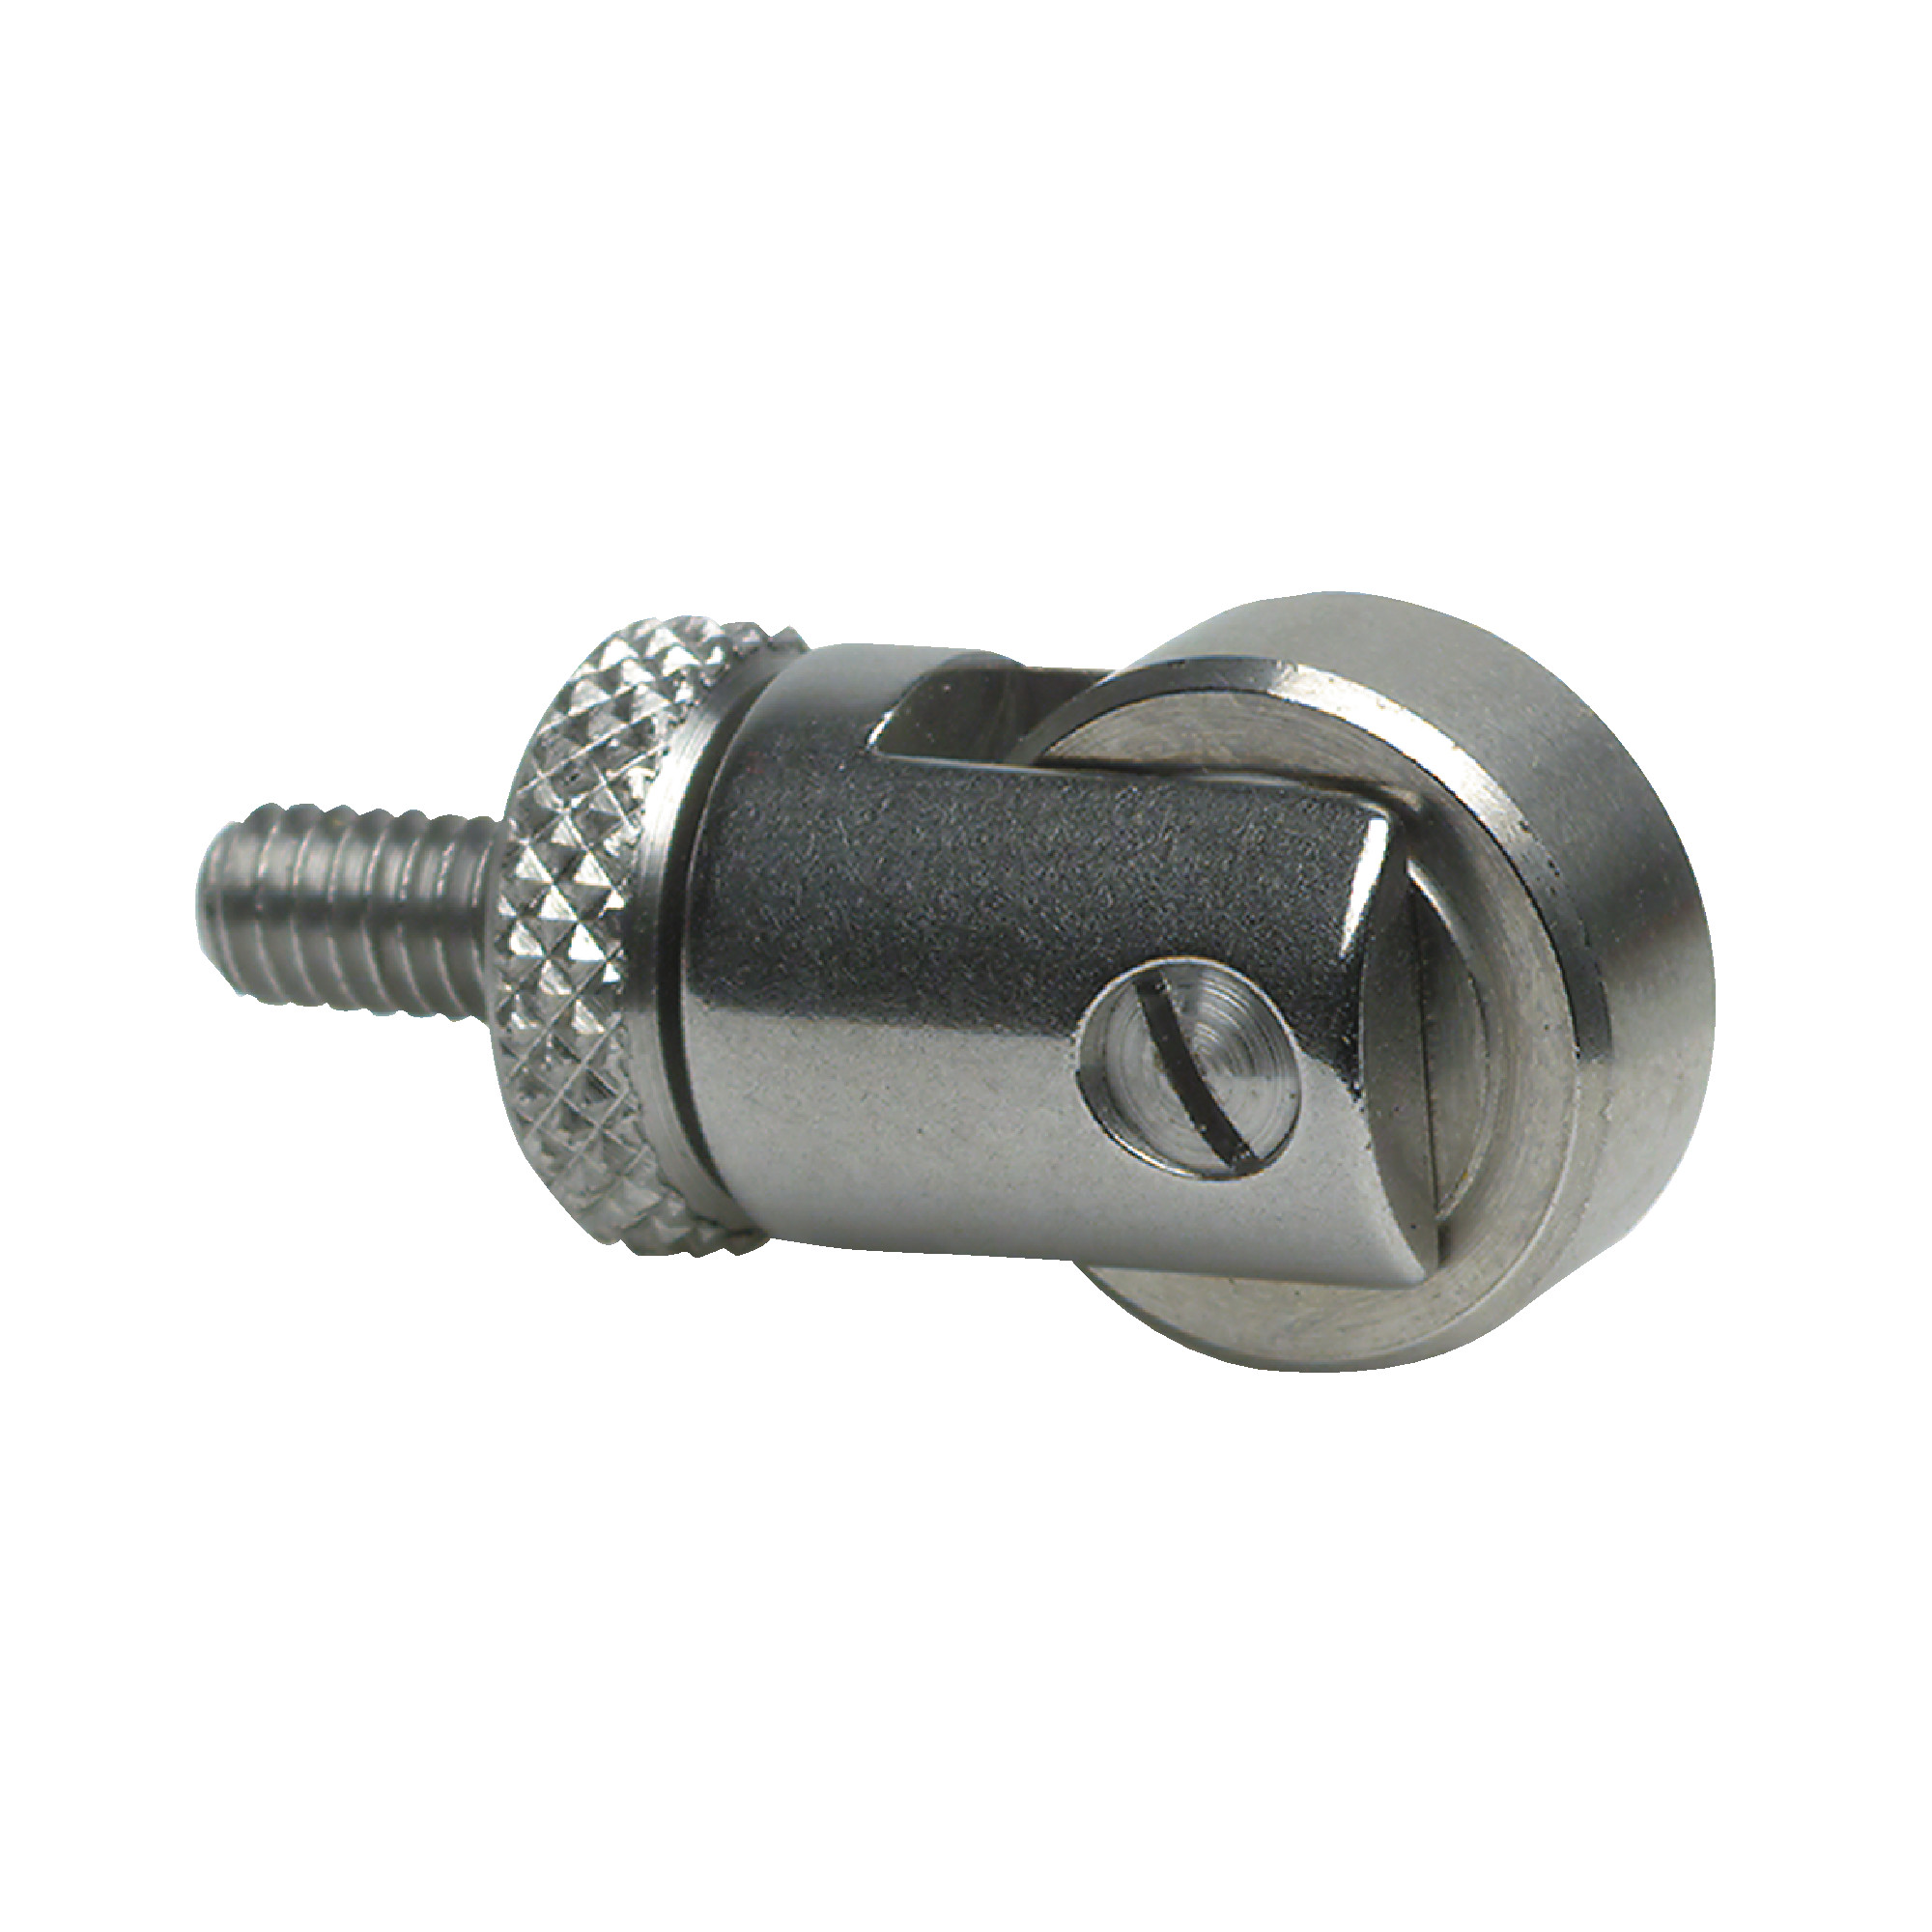 Special Function Roller Contact Point